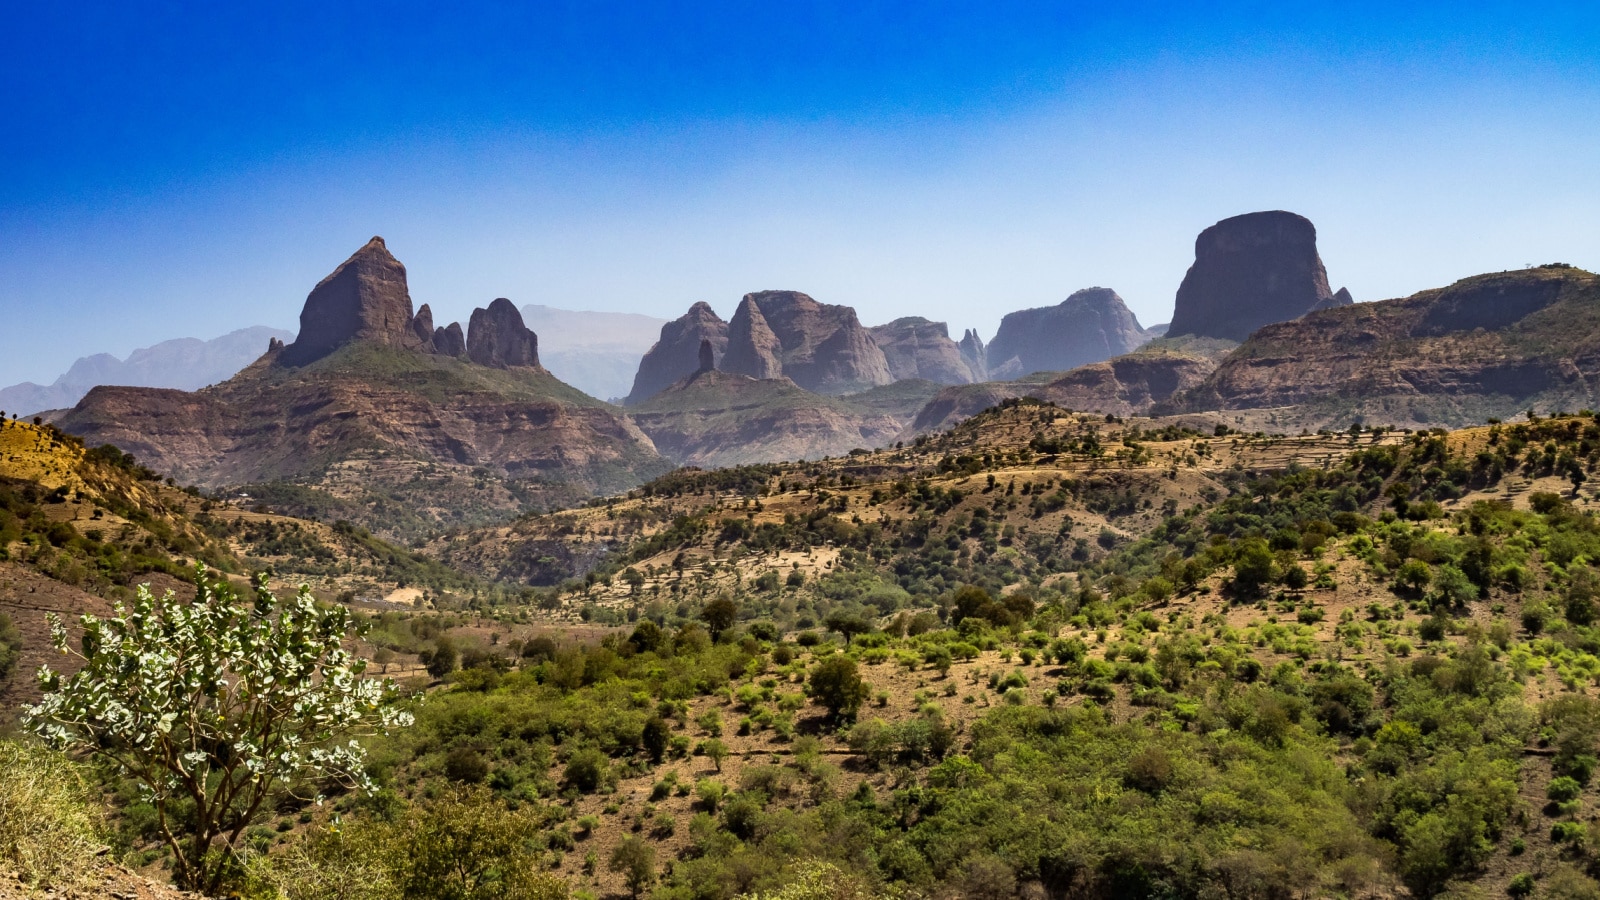 Landscape view of the Simien Mountains National Park in Northern Ethiopia